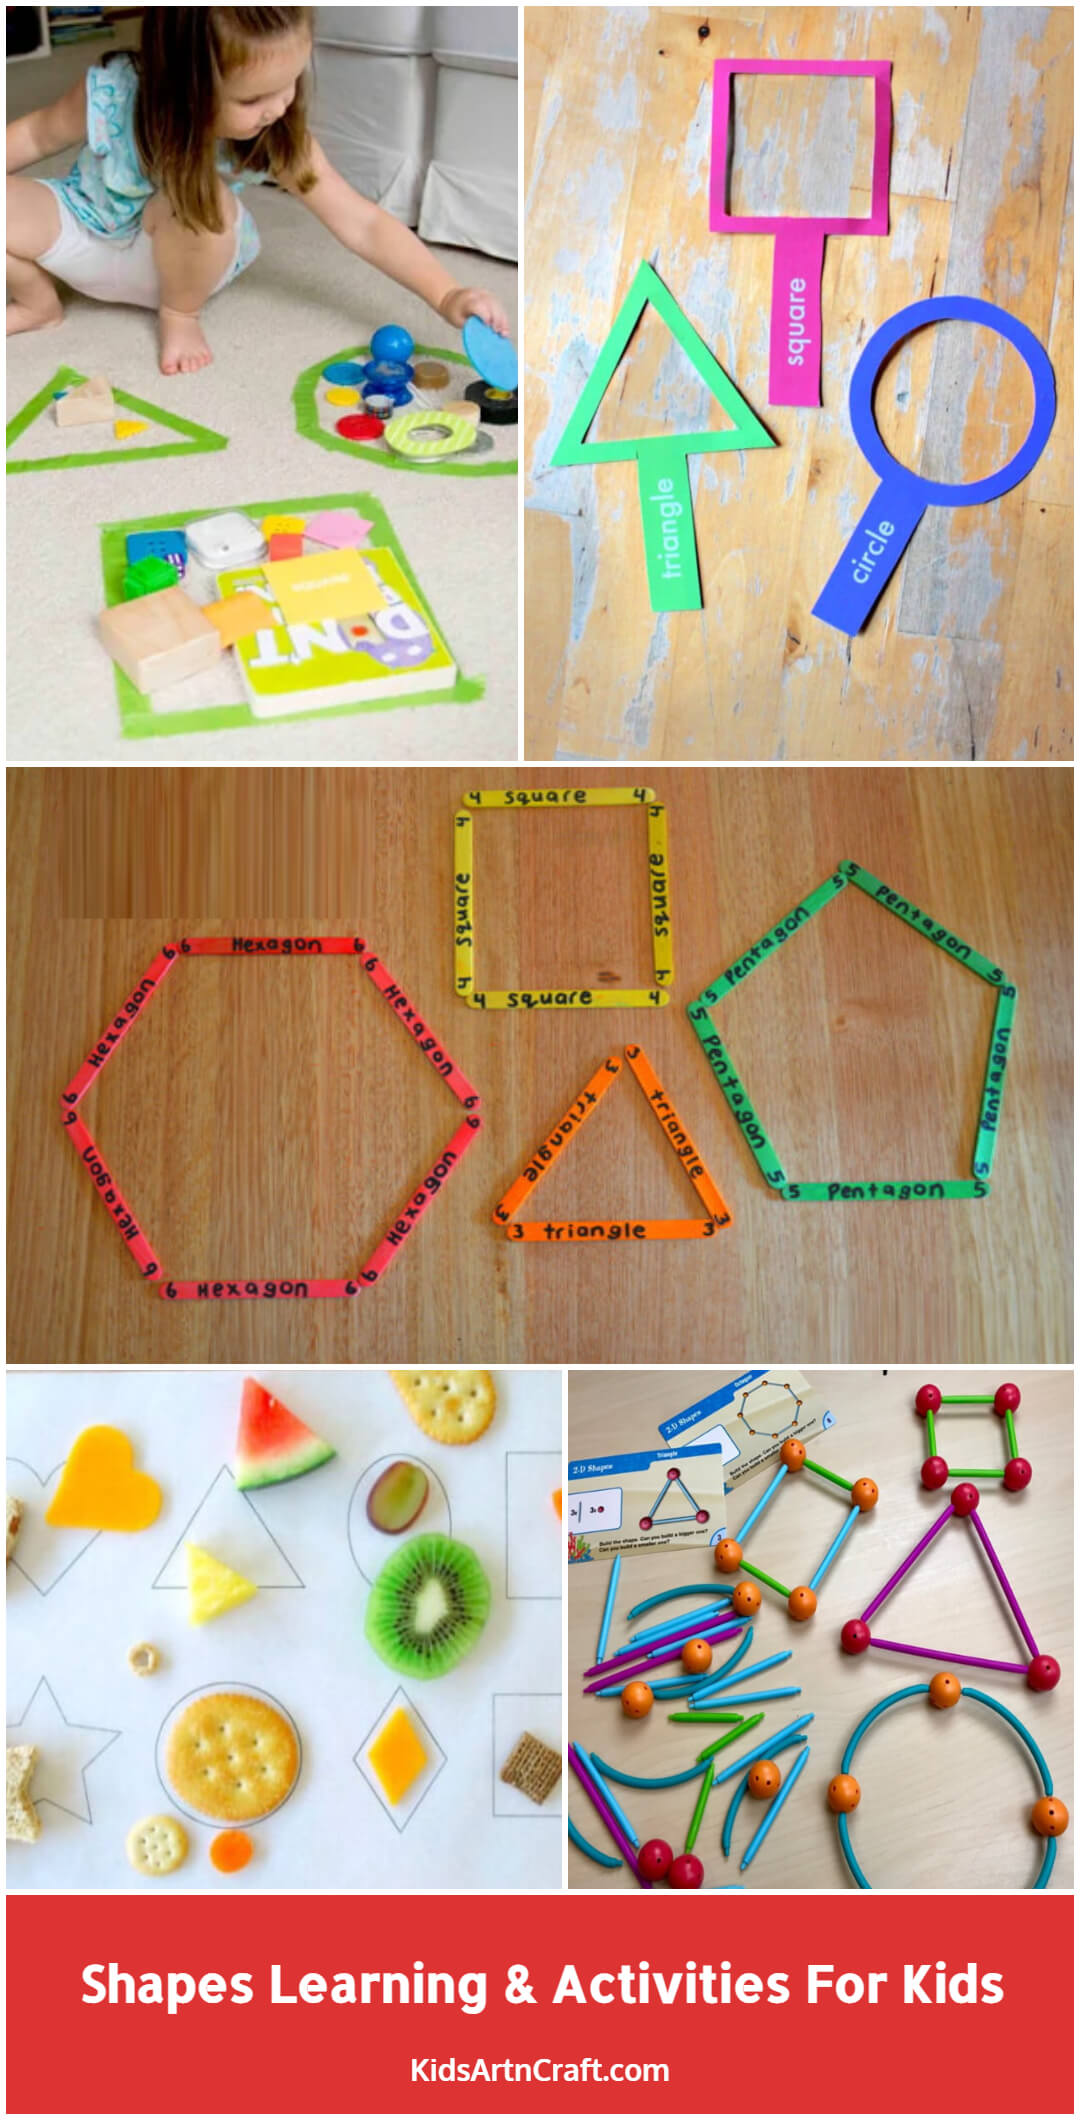 Shapes Learning & Activities For Kids